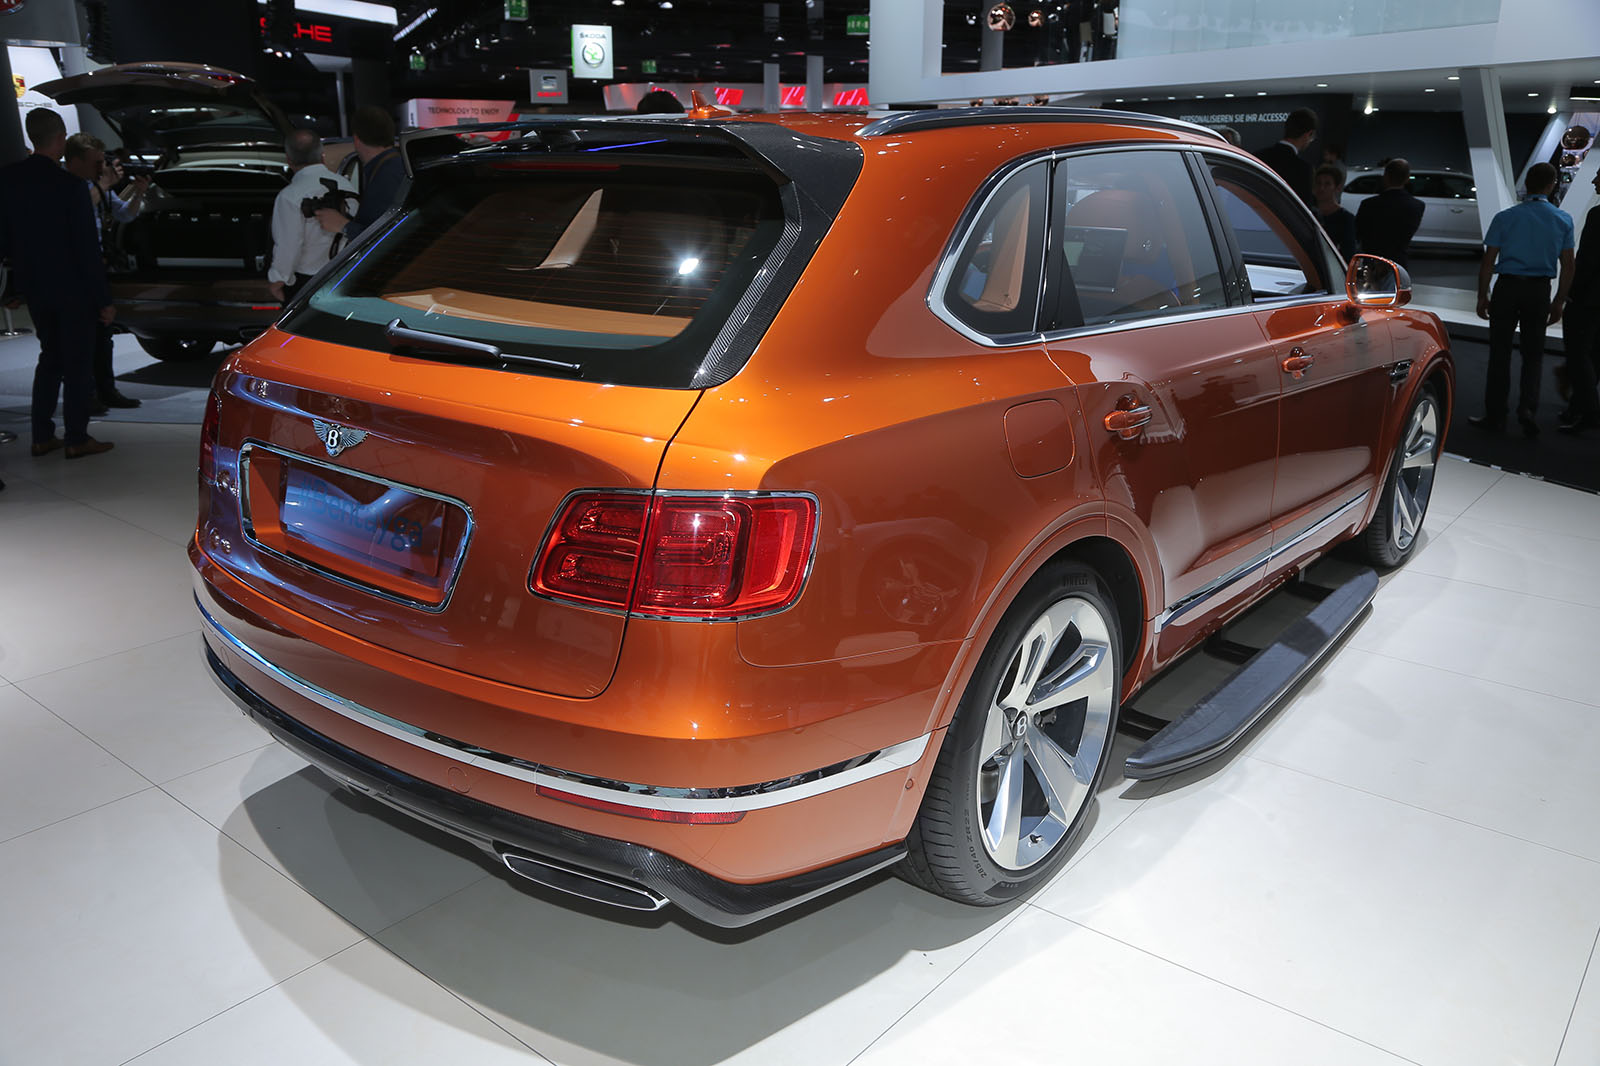 Frankfurt motor show 2015 - show report and gallery